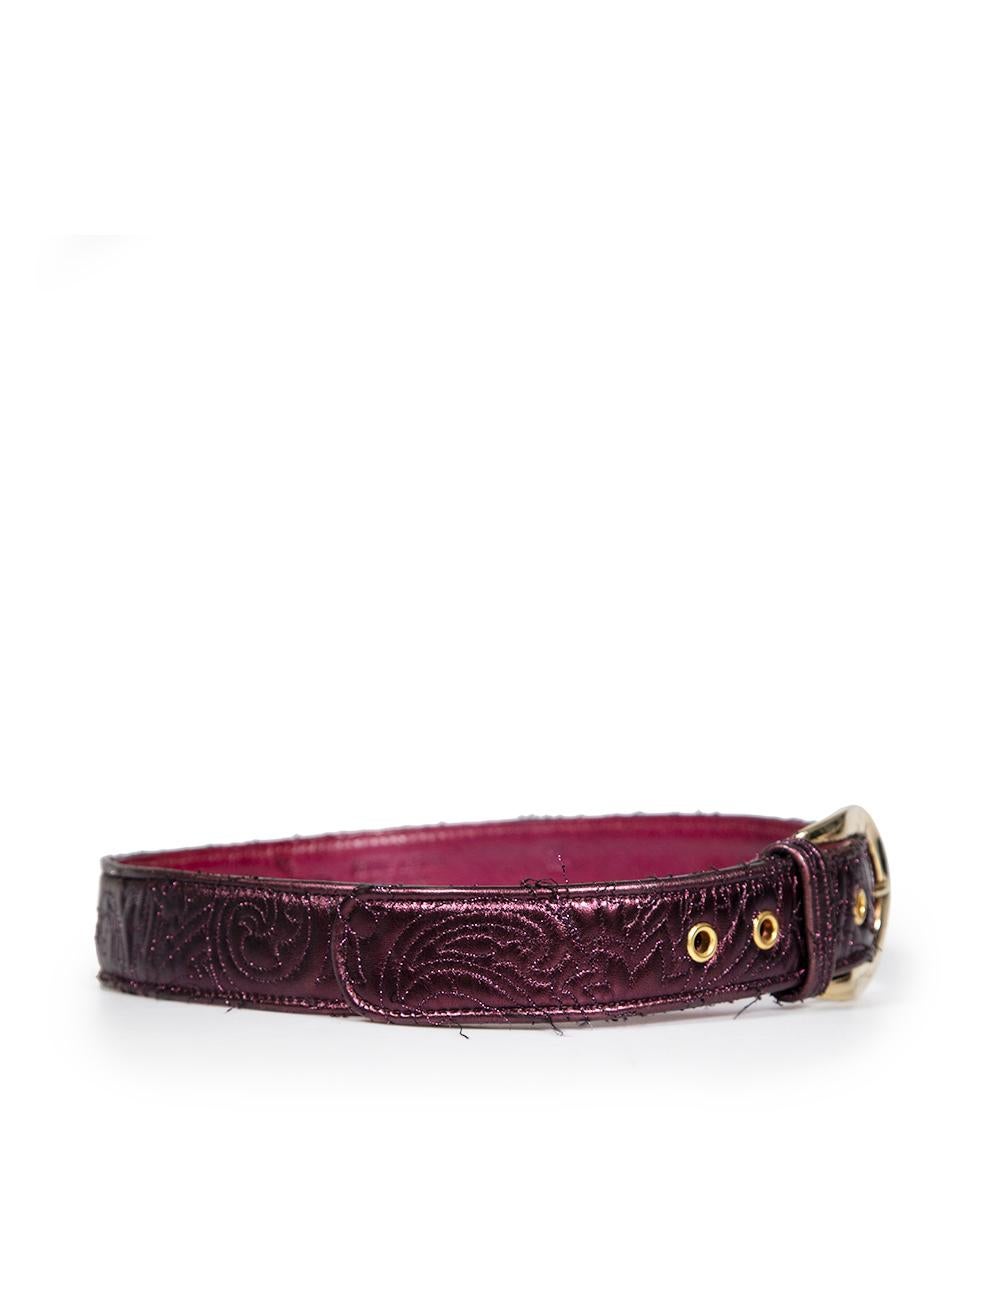 CONDITION is Very good. Minimal wear to belt is evident. Minimal wear to the edges with fraying threads on this used Etro designer resale item.
 
 
 
 Details
 
 
 Purple
 
 Leather
 
 Waist belt
 
 Metallic accent
 
 Abstract quilted accent
 
 Gold